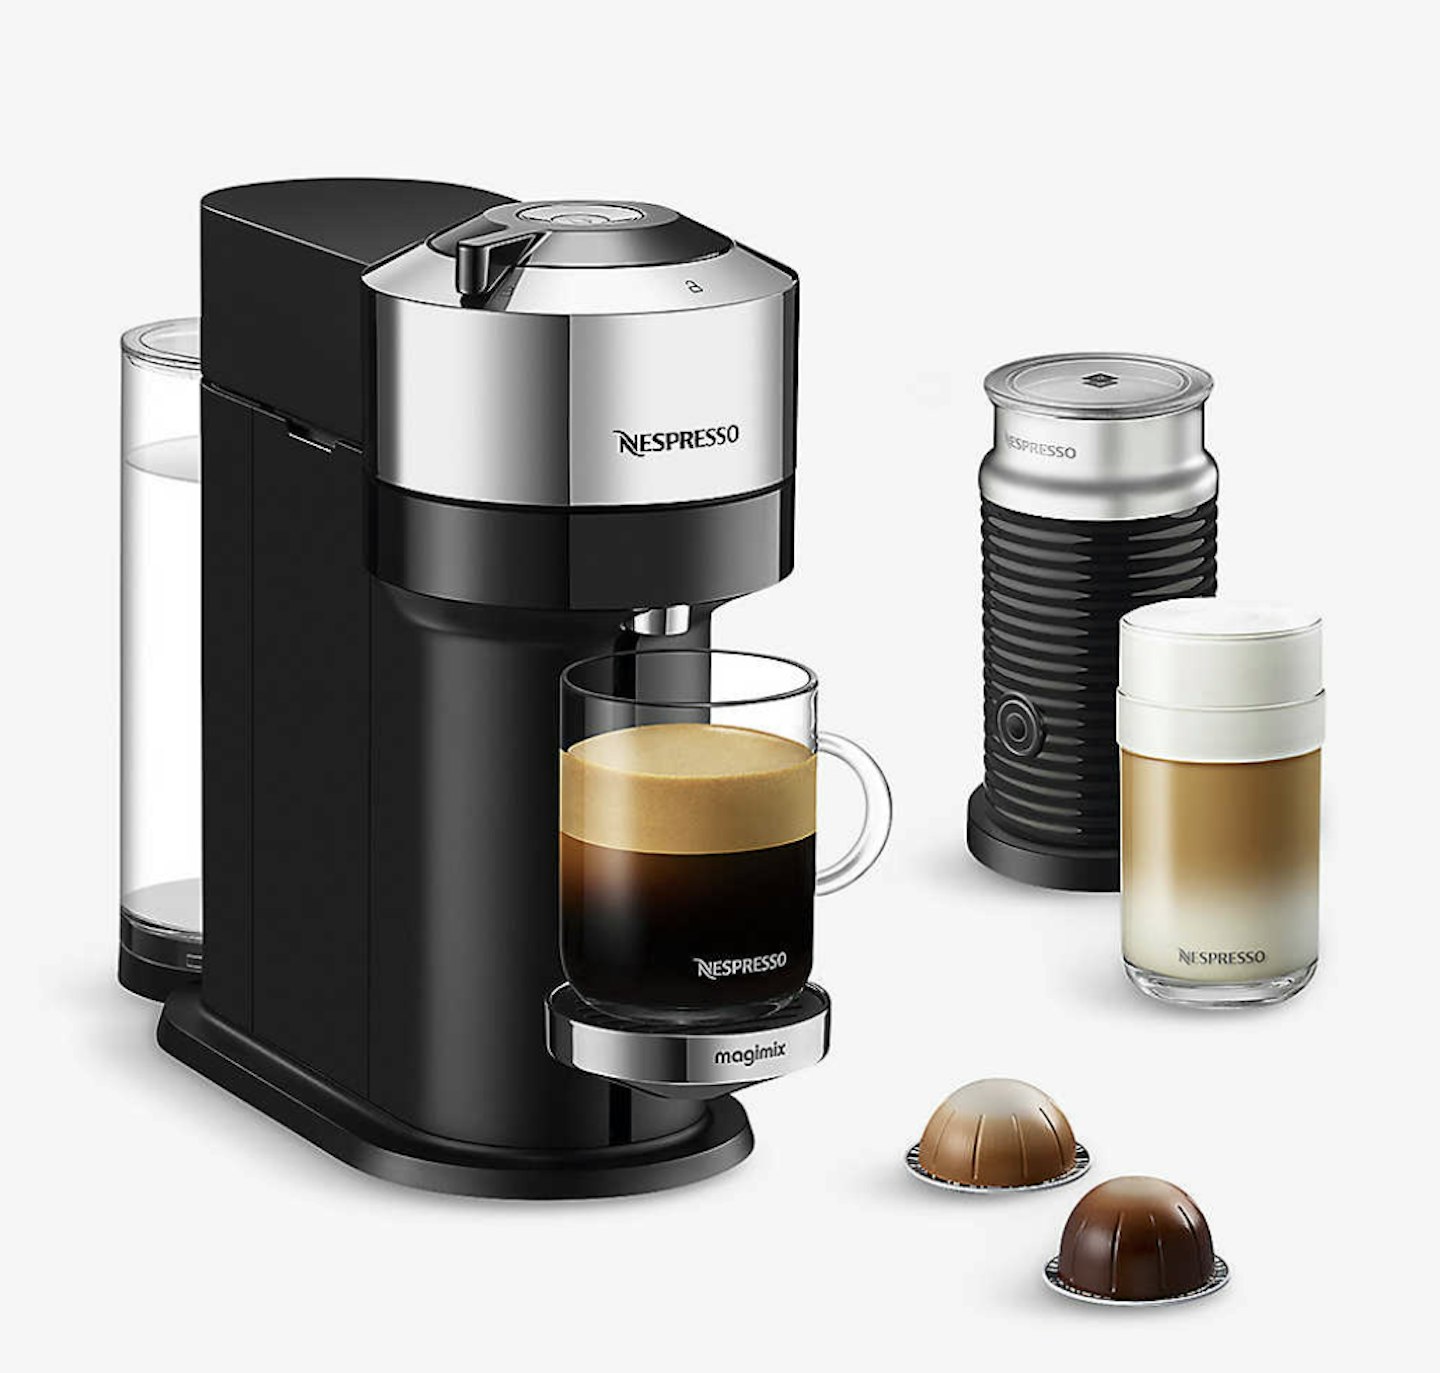 NESPRESSO Vertuo Next Deluxe Coffee Machine And Milk Frother